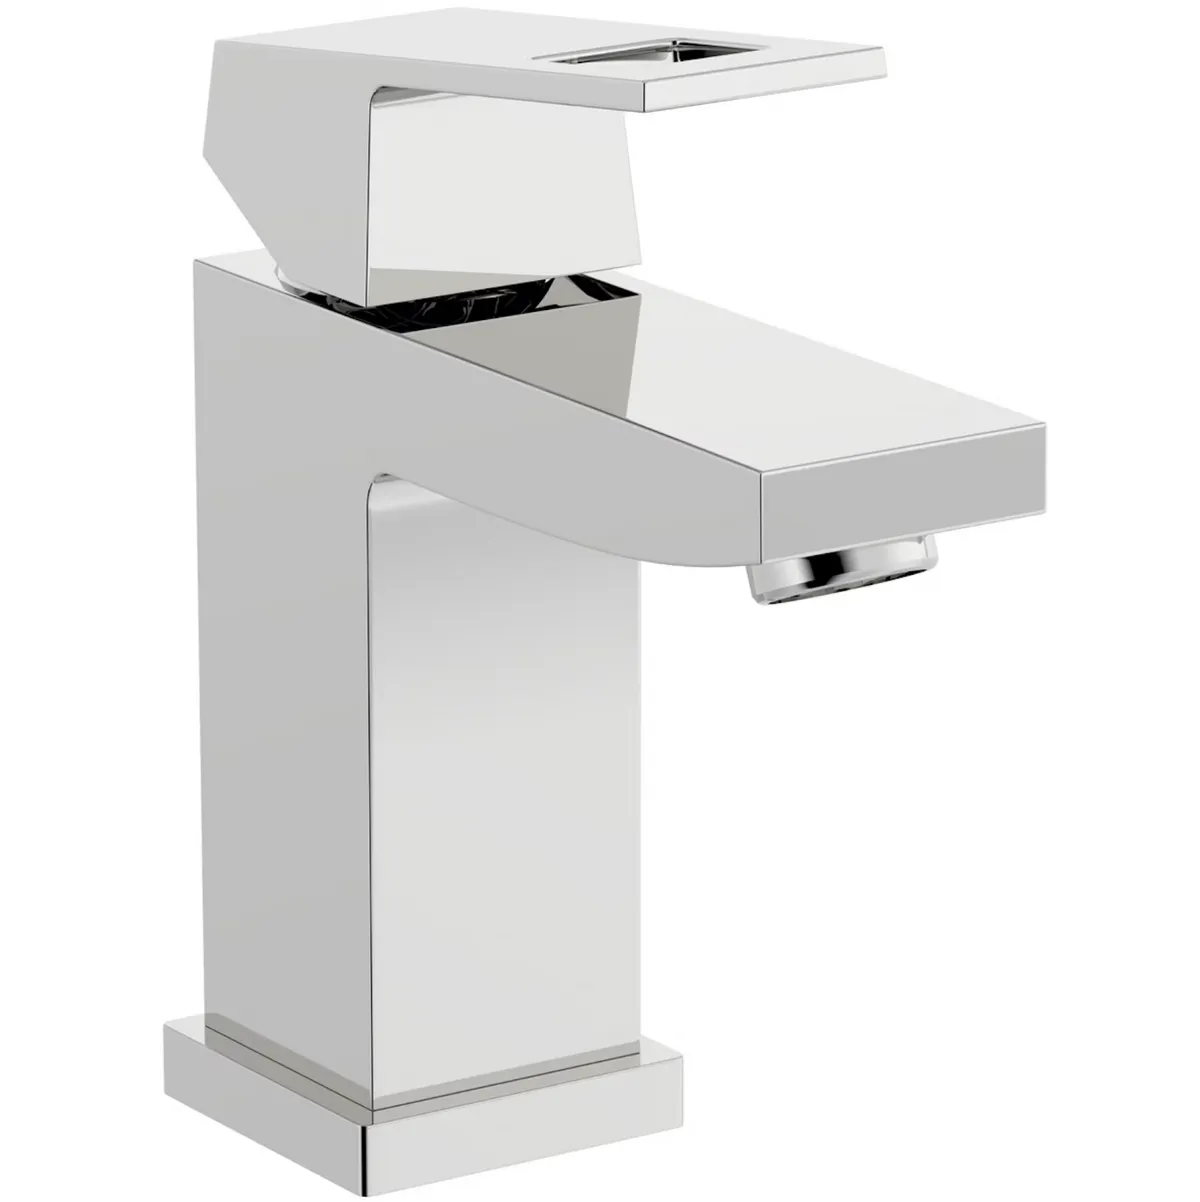 Grohe Eurocube basin mixer tap with waste